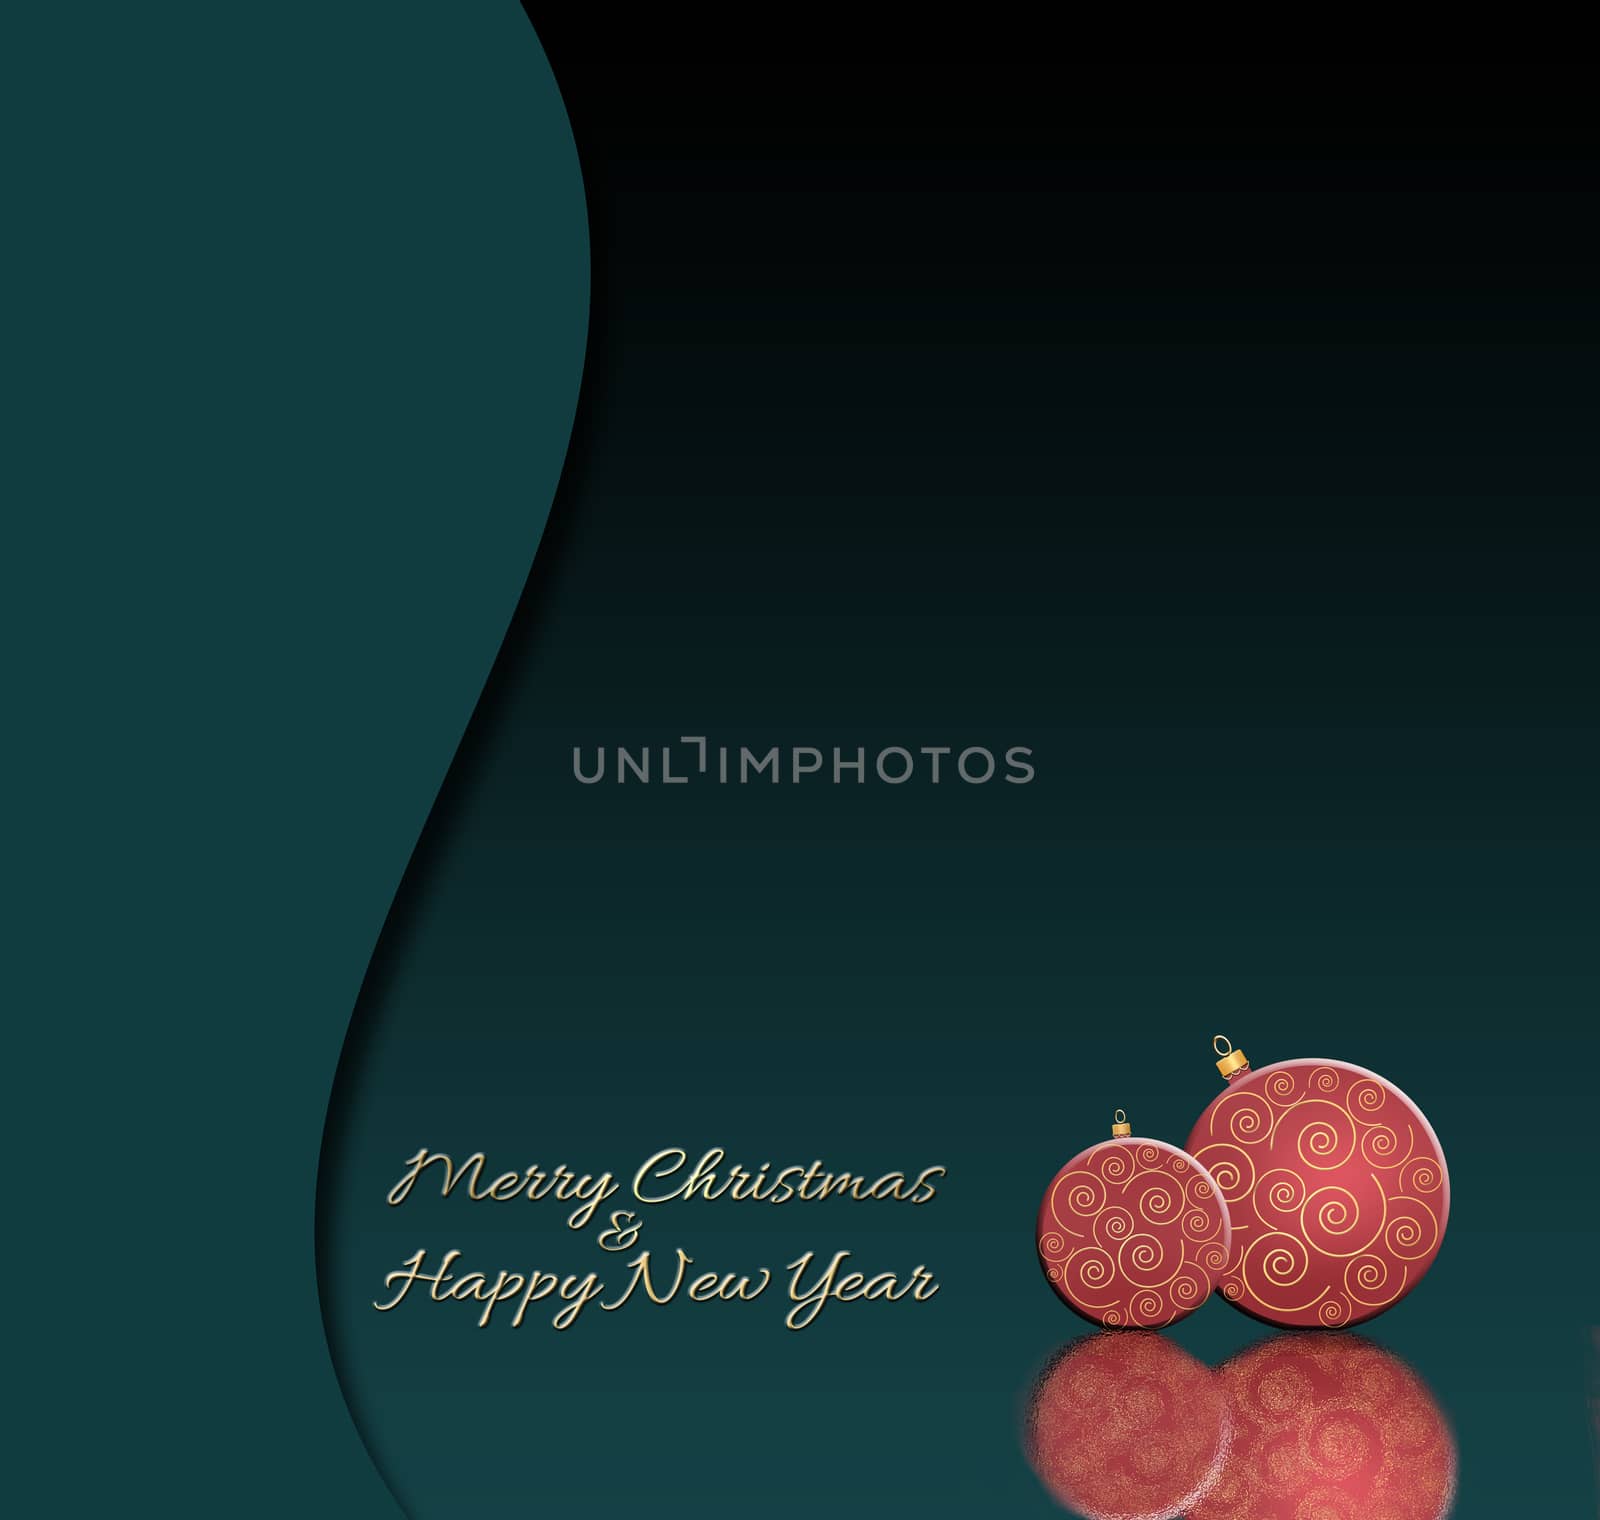 Elegant Christmas background with hanging balls in gtrrn red colour by NelliPolk